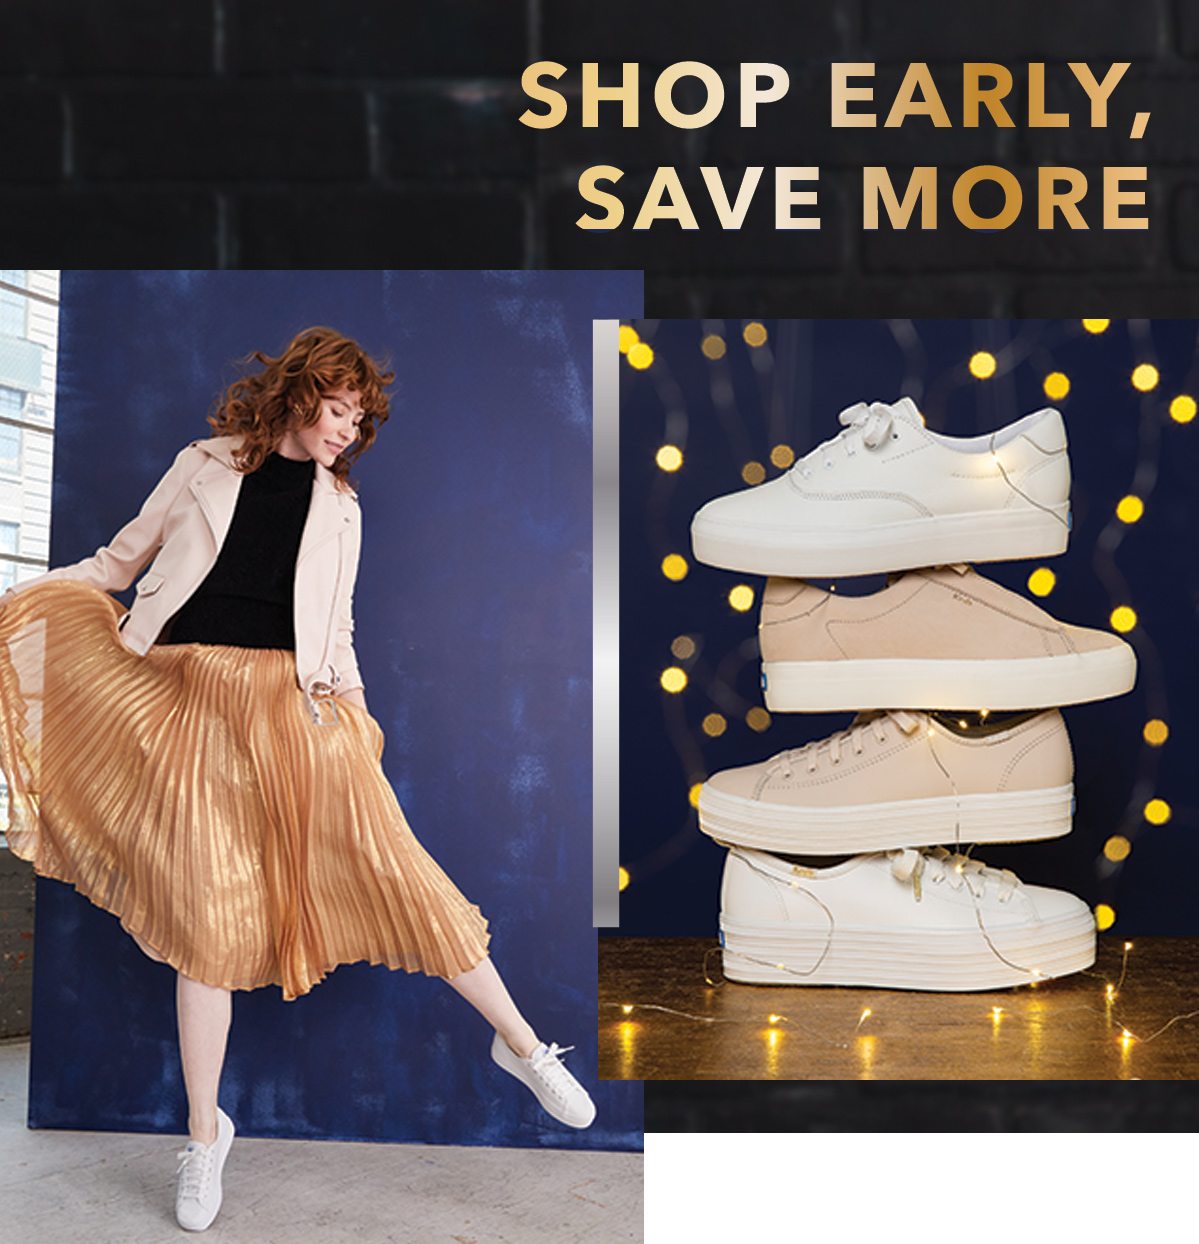 Shop Early, Save More.